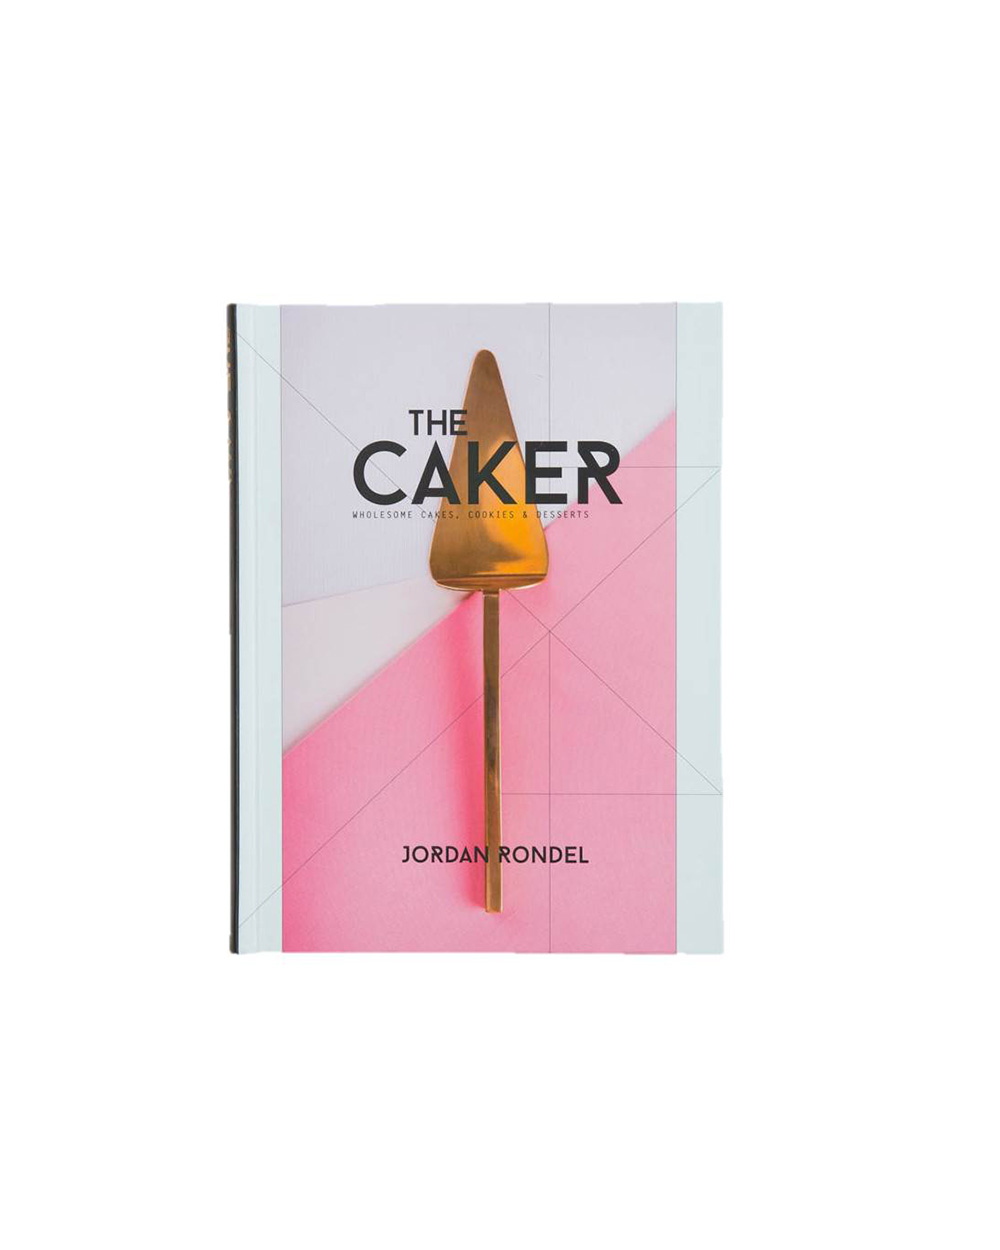 The Caker by Jordan Rondel, $50, from The Caker